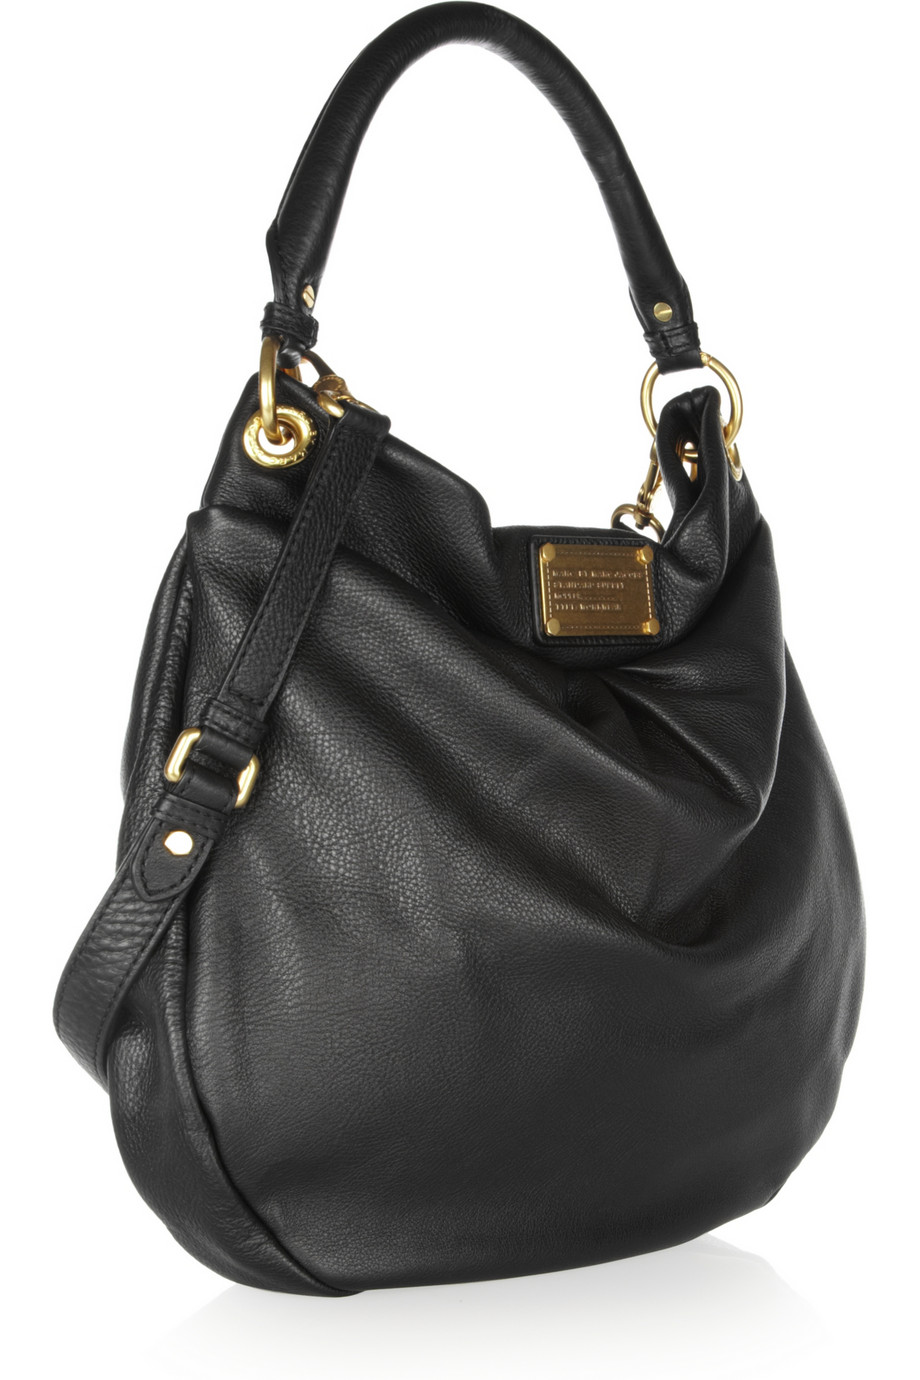 Marc By Marc Jacobs The Classic Q Hillier Hobo Textured-Leather Shoulder Bag in Black - Lyst